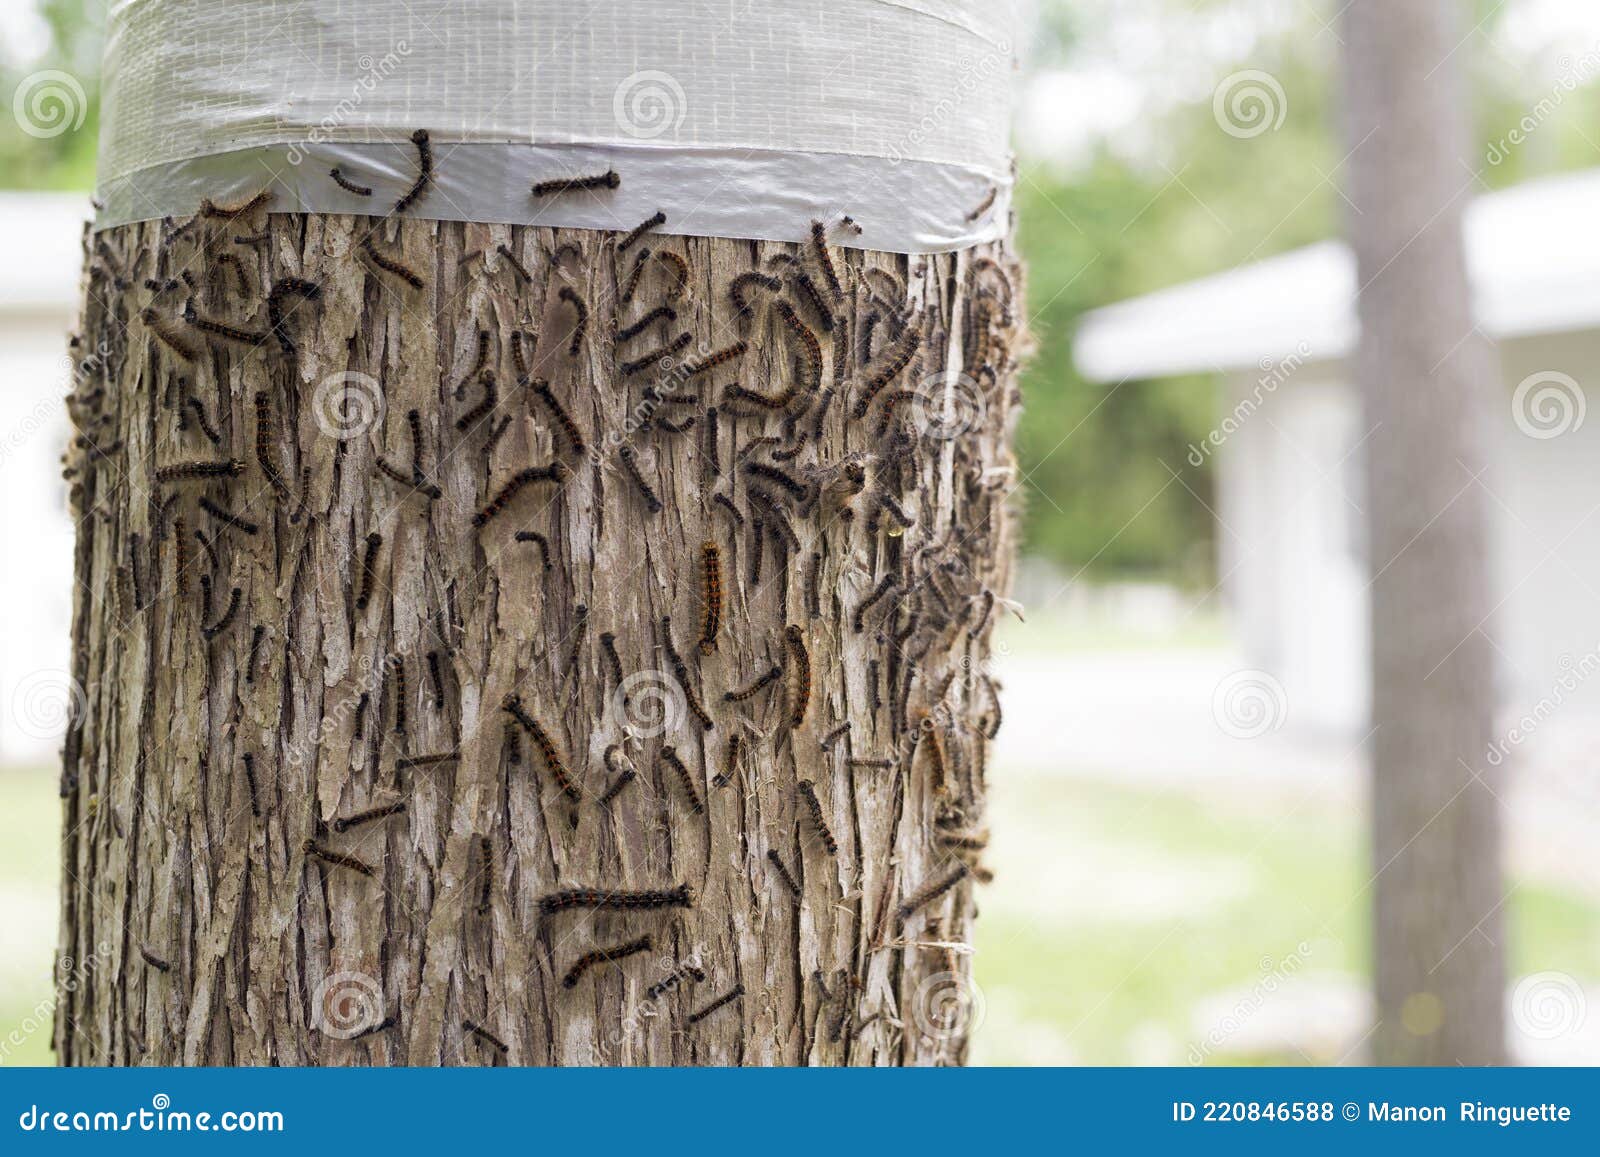 https://thumbs.dreamstime.com/z/gypsy-moth-infestation-tree-banding-larvae-various-stages-growth-attempt-to-crawl-up-trunk-cedar-band-duct-tape-220846588.jpg